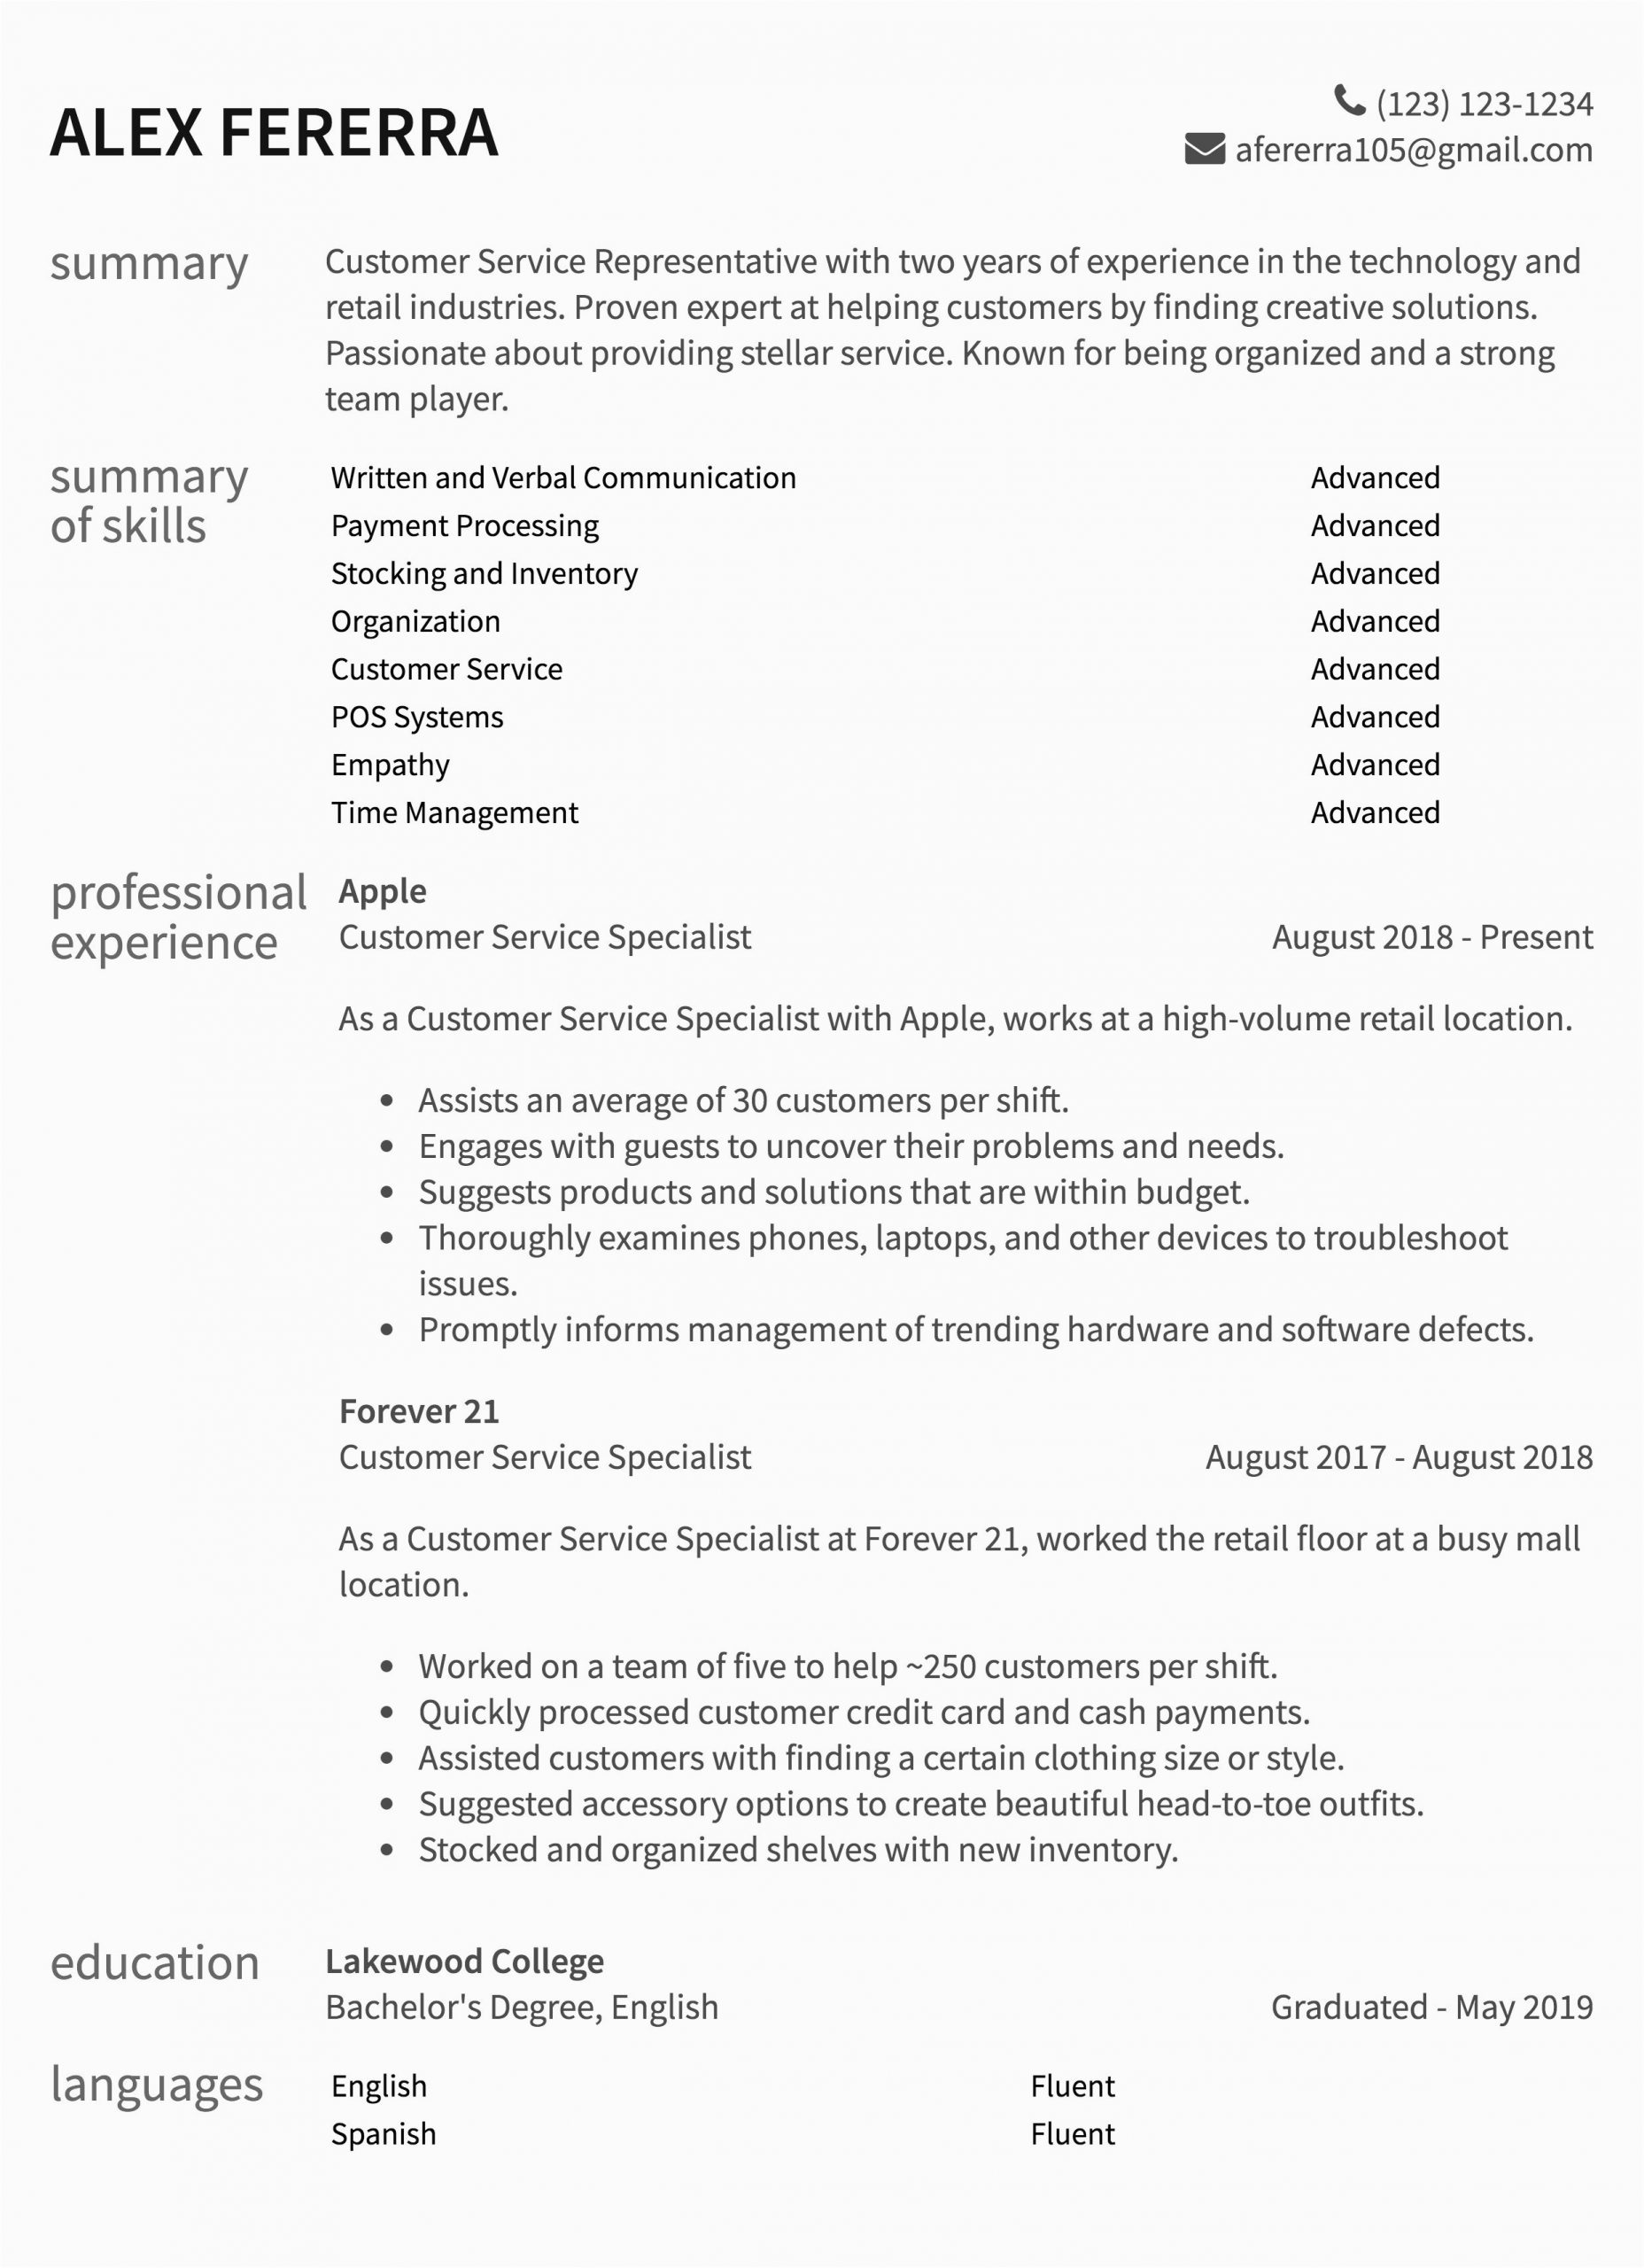 Resume Templates for Customer Service Jobs Customer Service Resume Samples & How to Guide